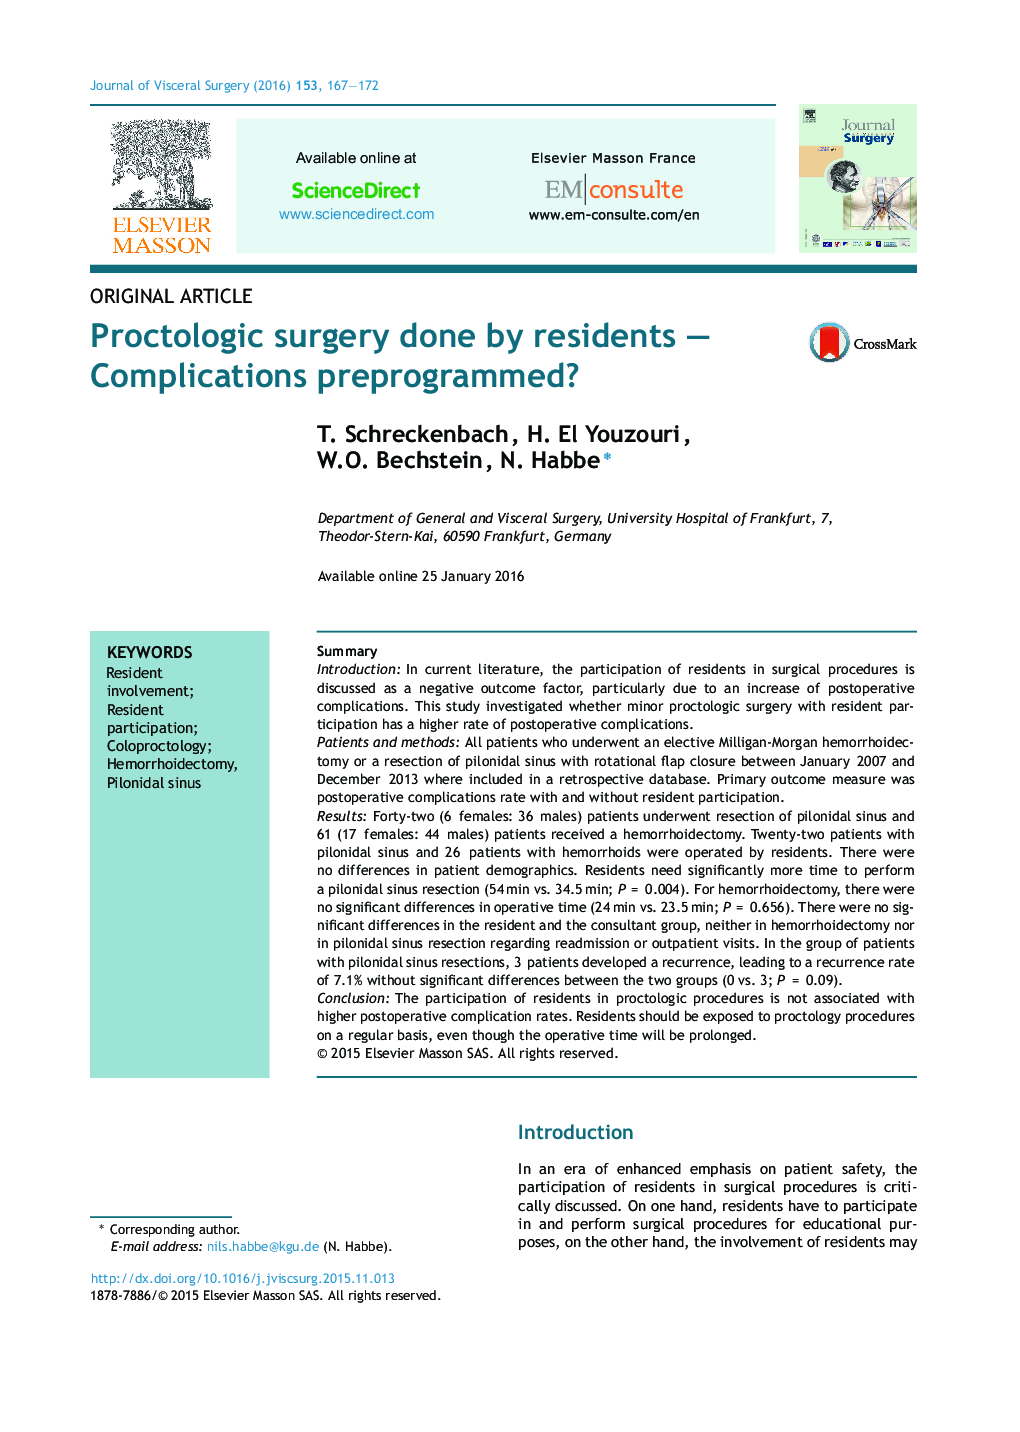 Proctologic surgery done by residents – Complications preprogrammed?